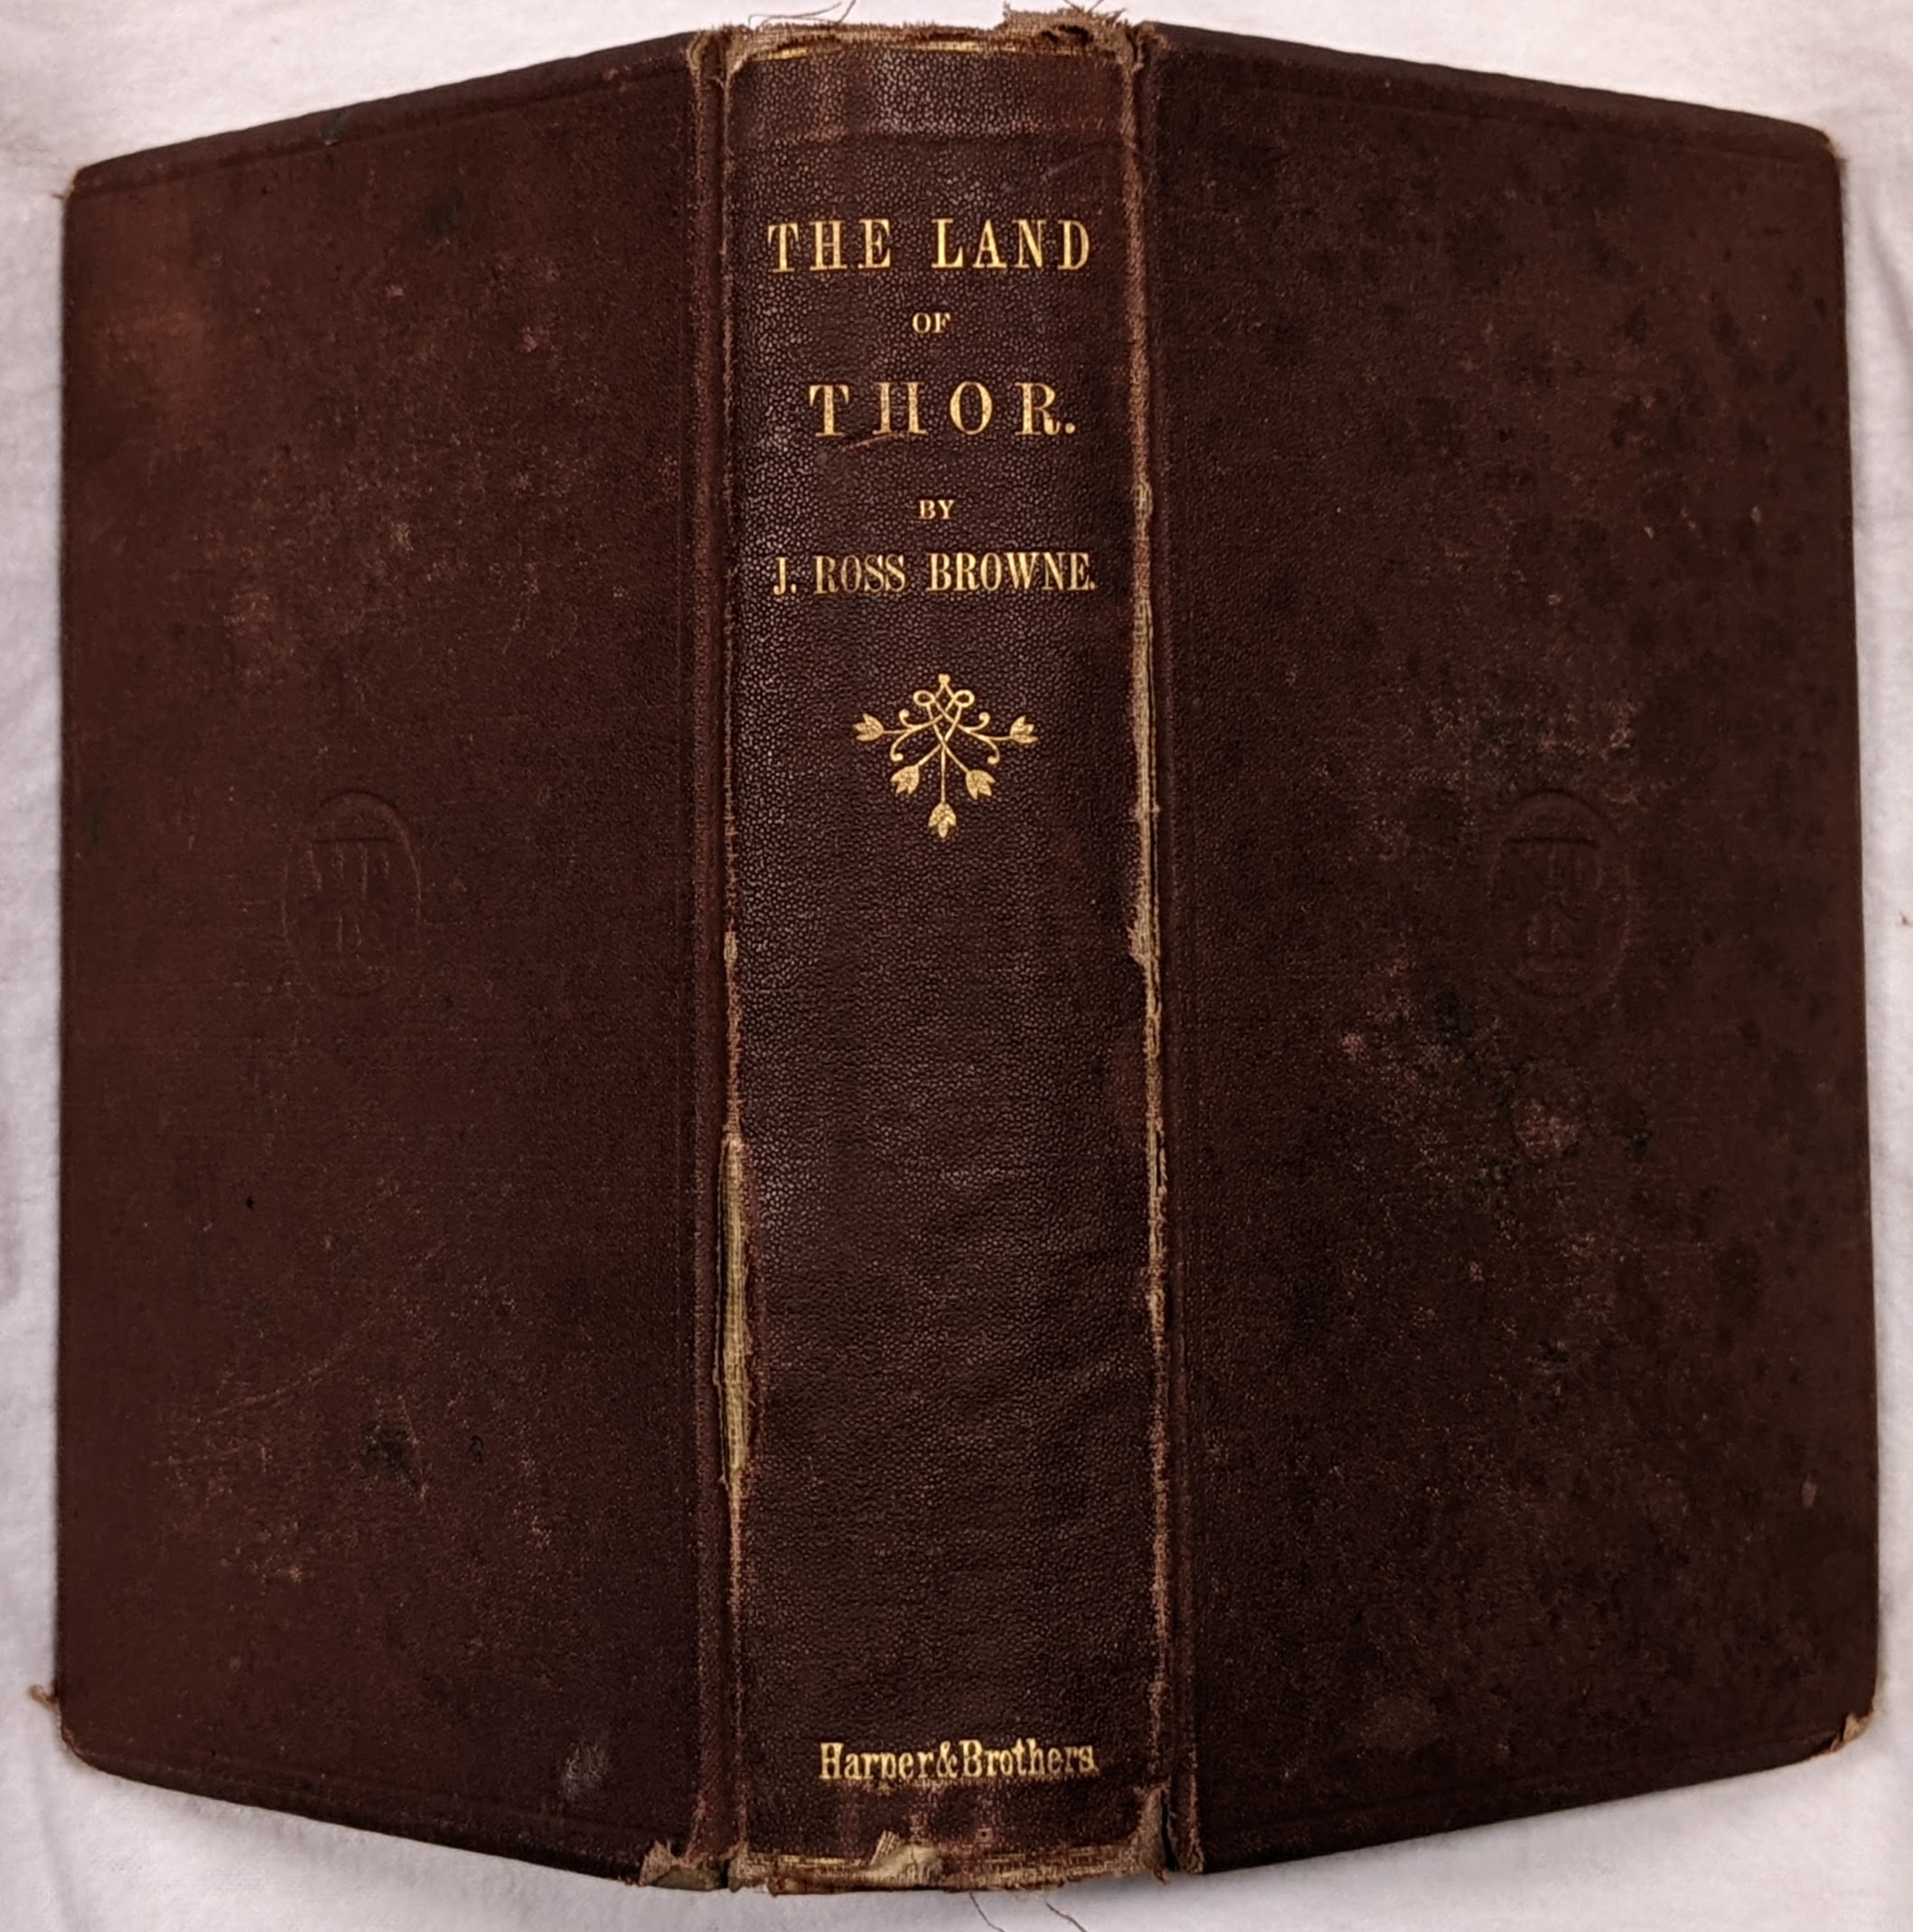 THE LAND OF THOR - Browne, J. Ross